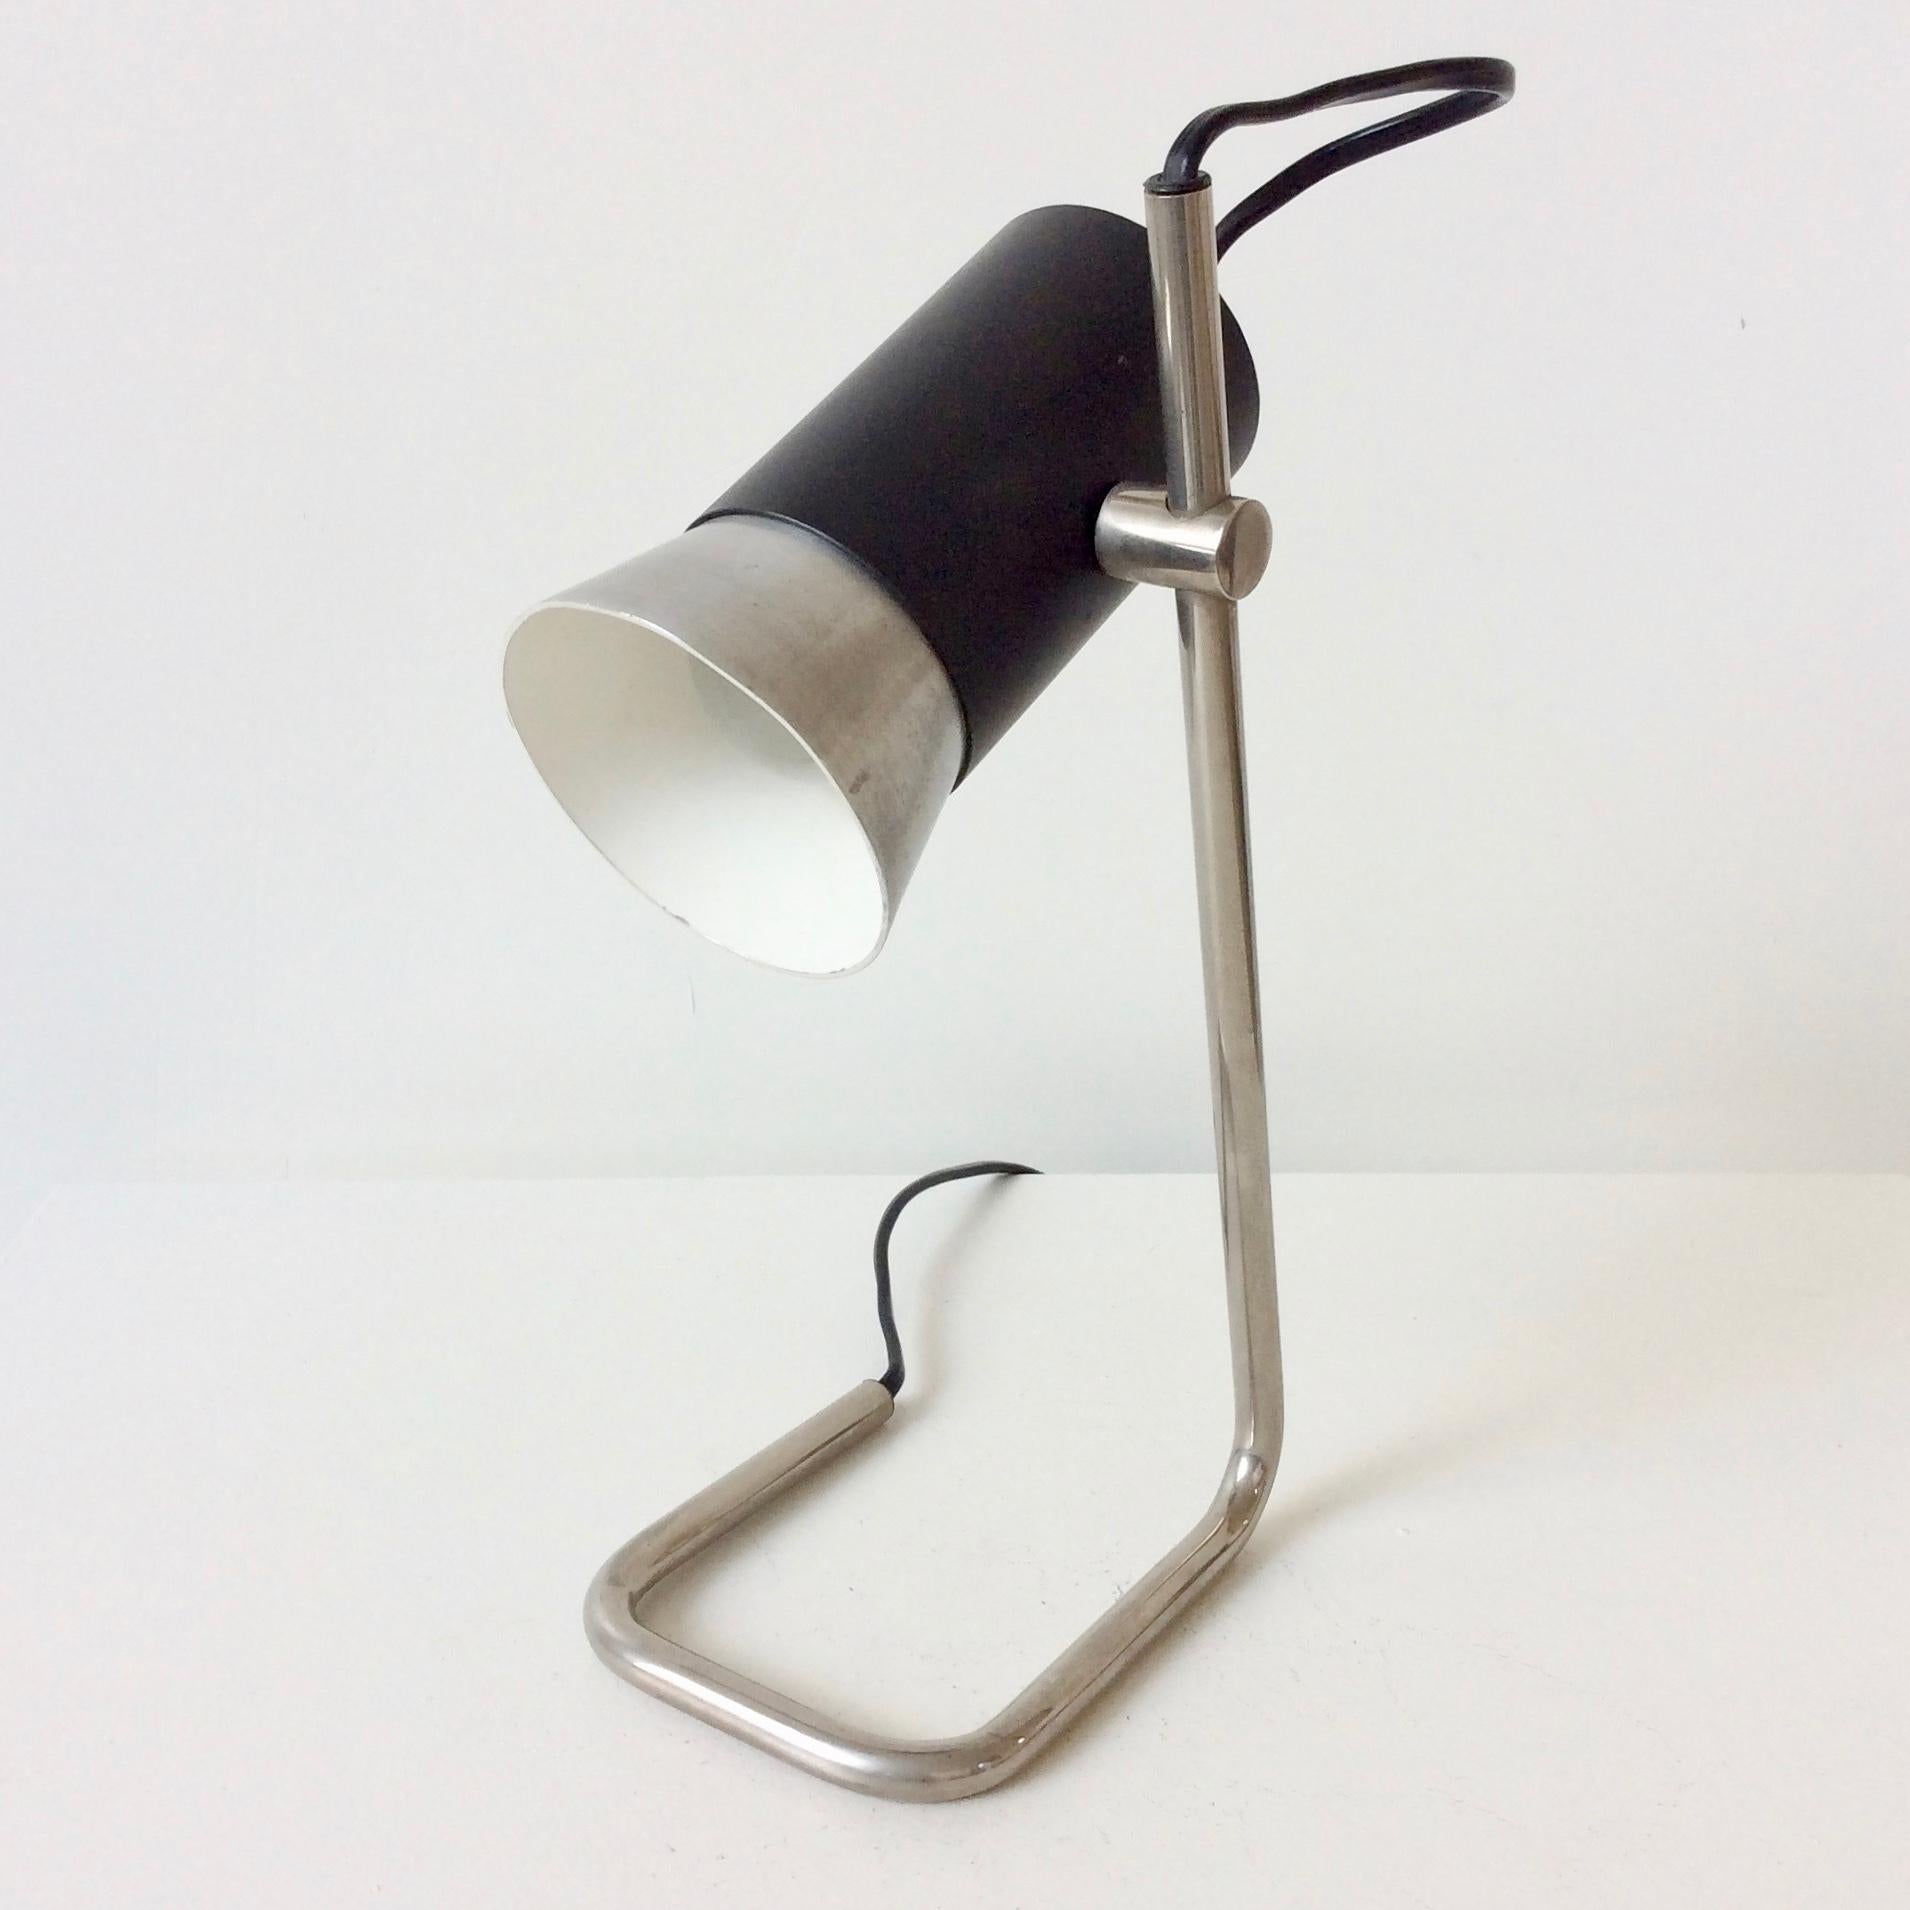 Nice desk or table lamp, attributed to Stilnovo, circa 1960, Italy.
Aluminum, black metal and chromed tubular steel.
Dimensions: 29 cm H, 19 cm W, 10 cm D.
Good original condition.
We ship worldwide.
All purchases are covered by our Buyer Protection